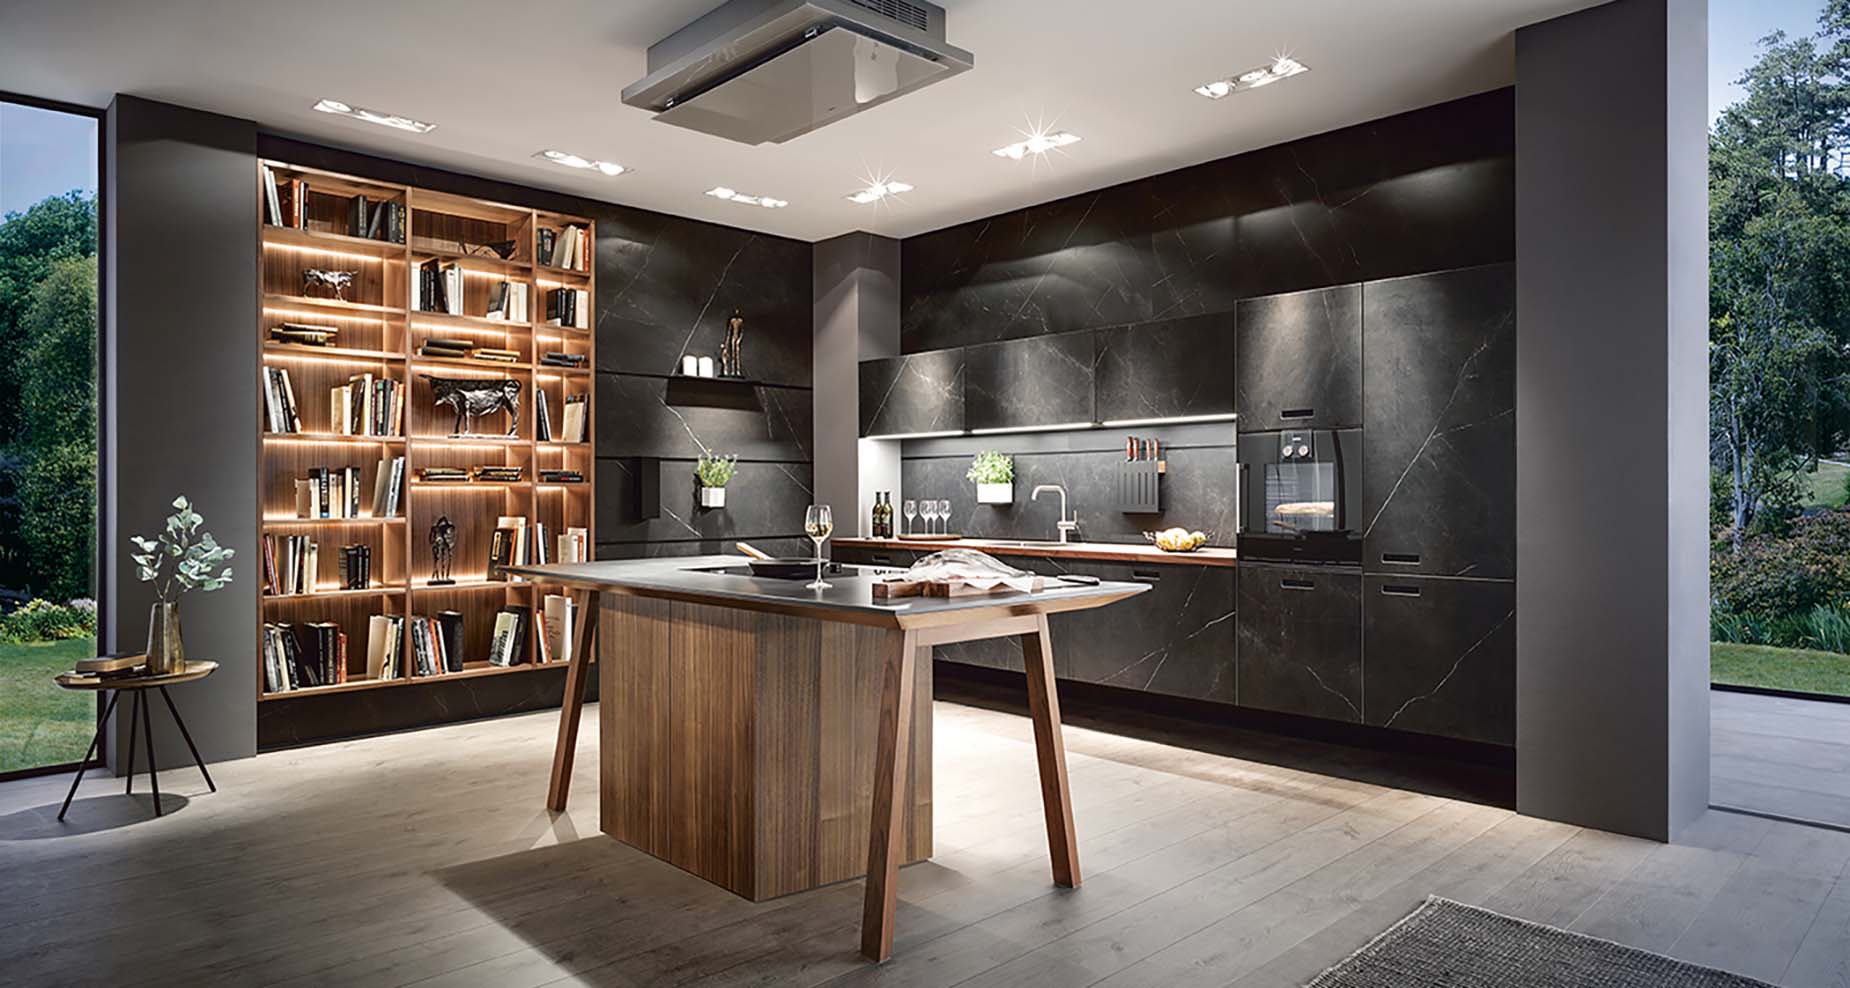 about the kitchen design experts